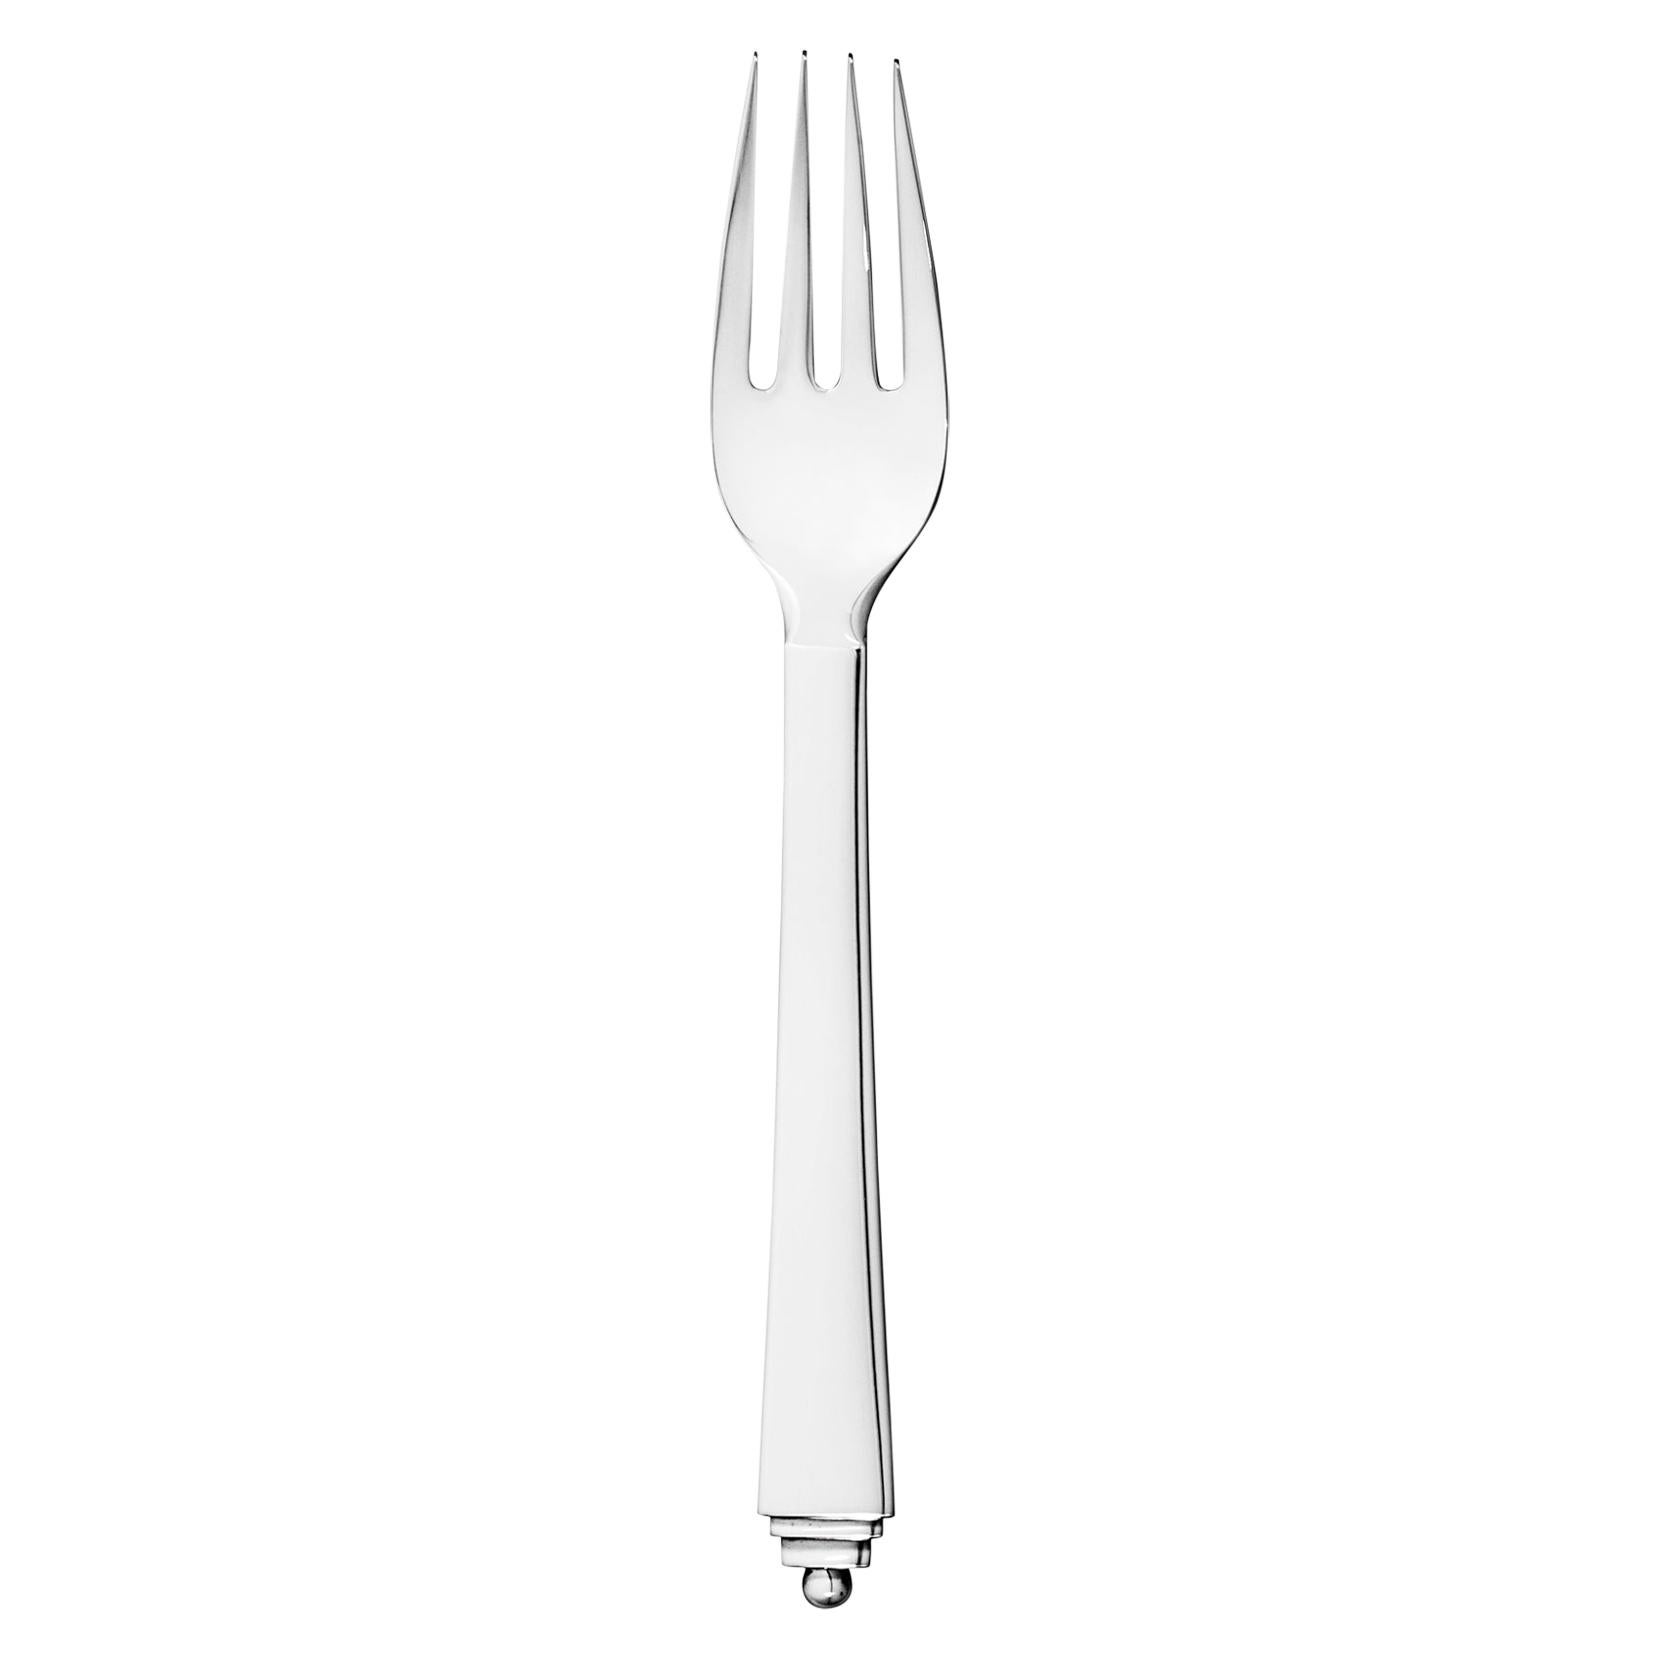 Georg Jensen Sterling Silver Pyramid Child's Fork by Harald Nielsen